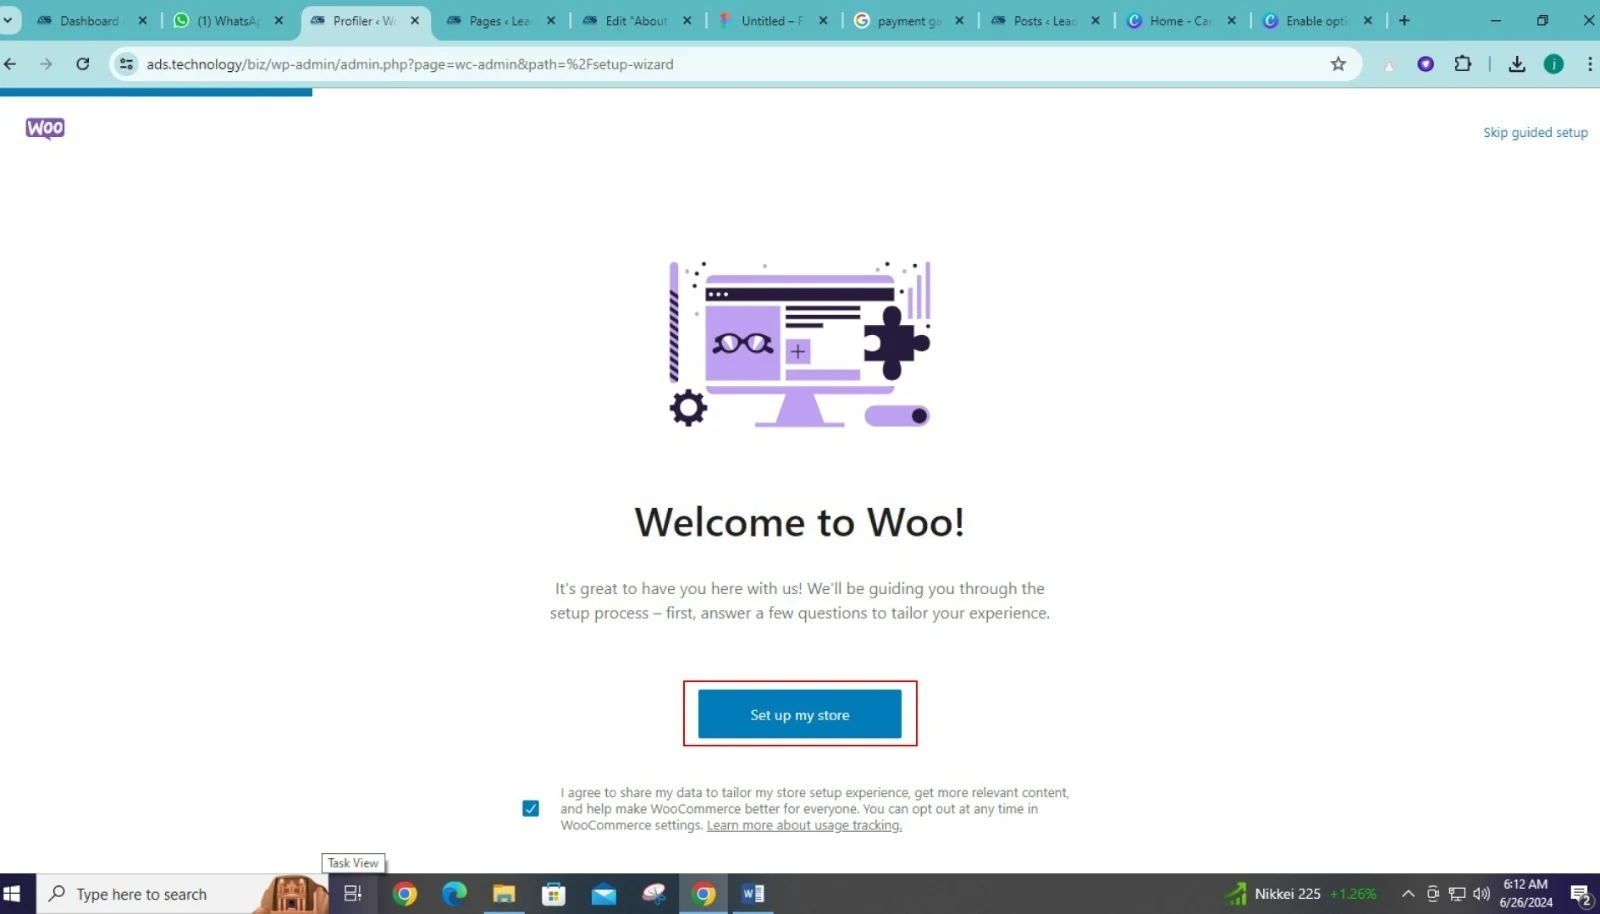 Welcome to WooCom page displayed